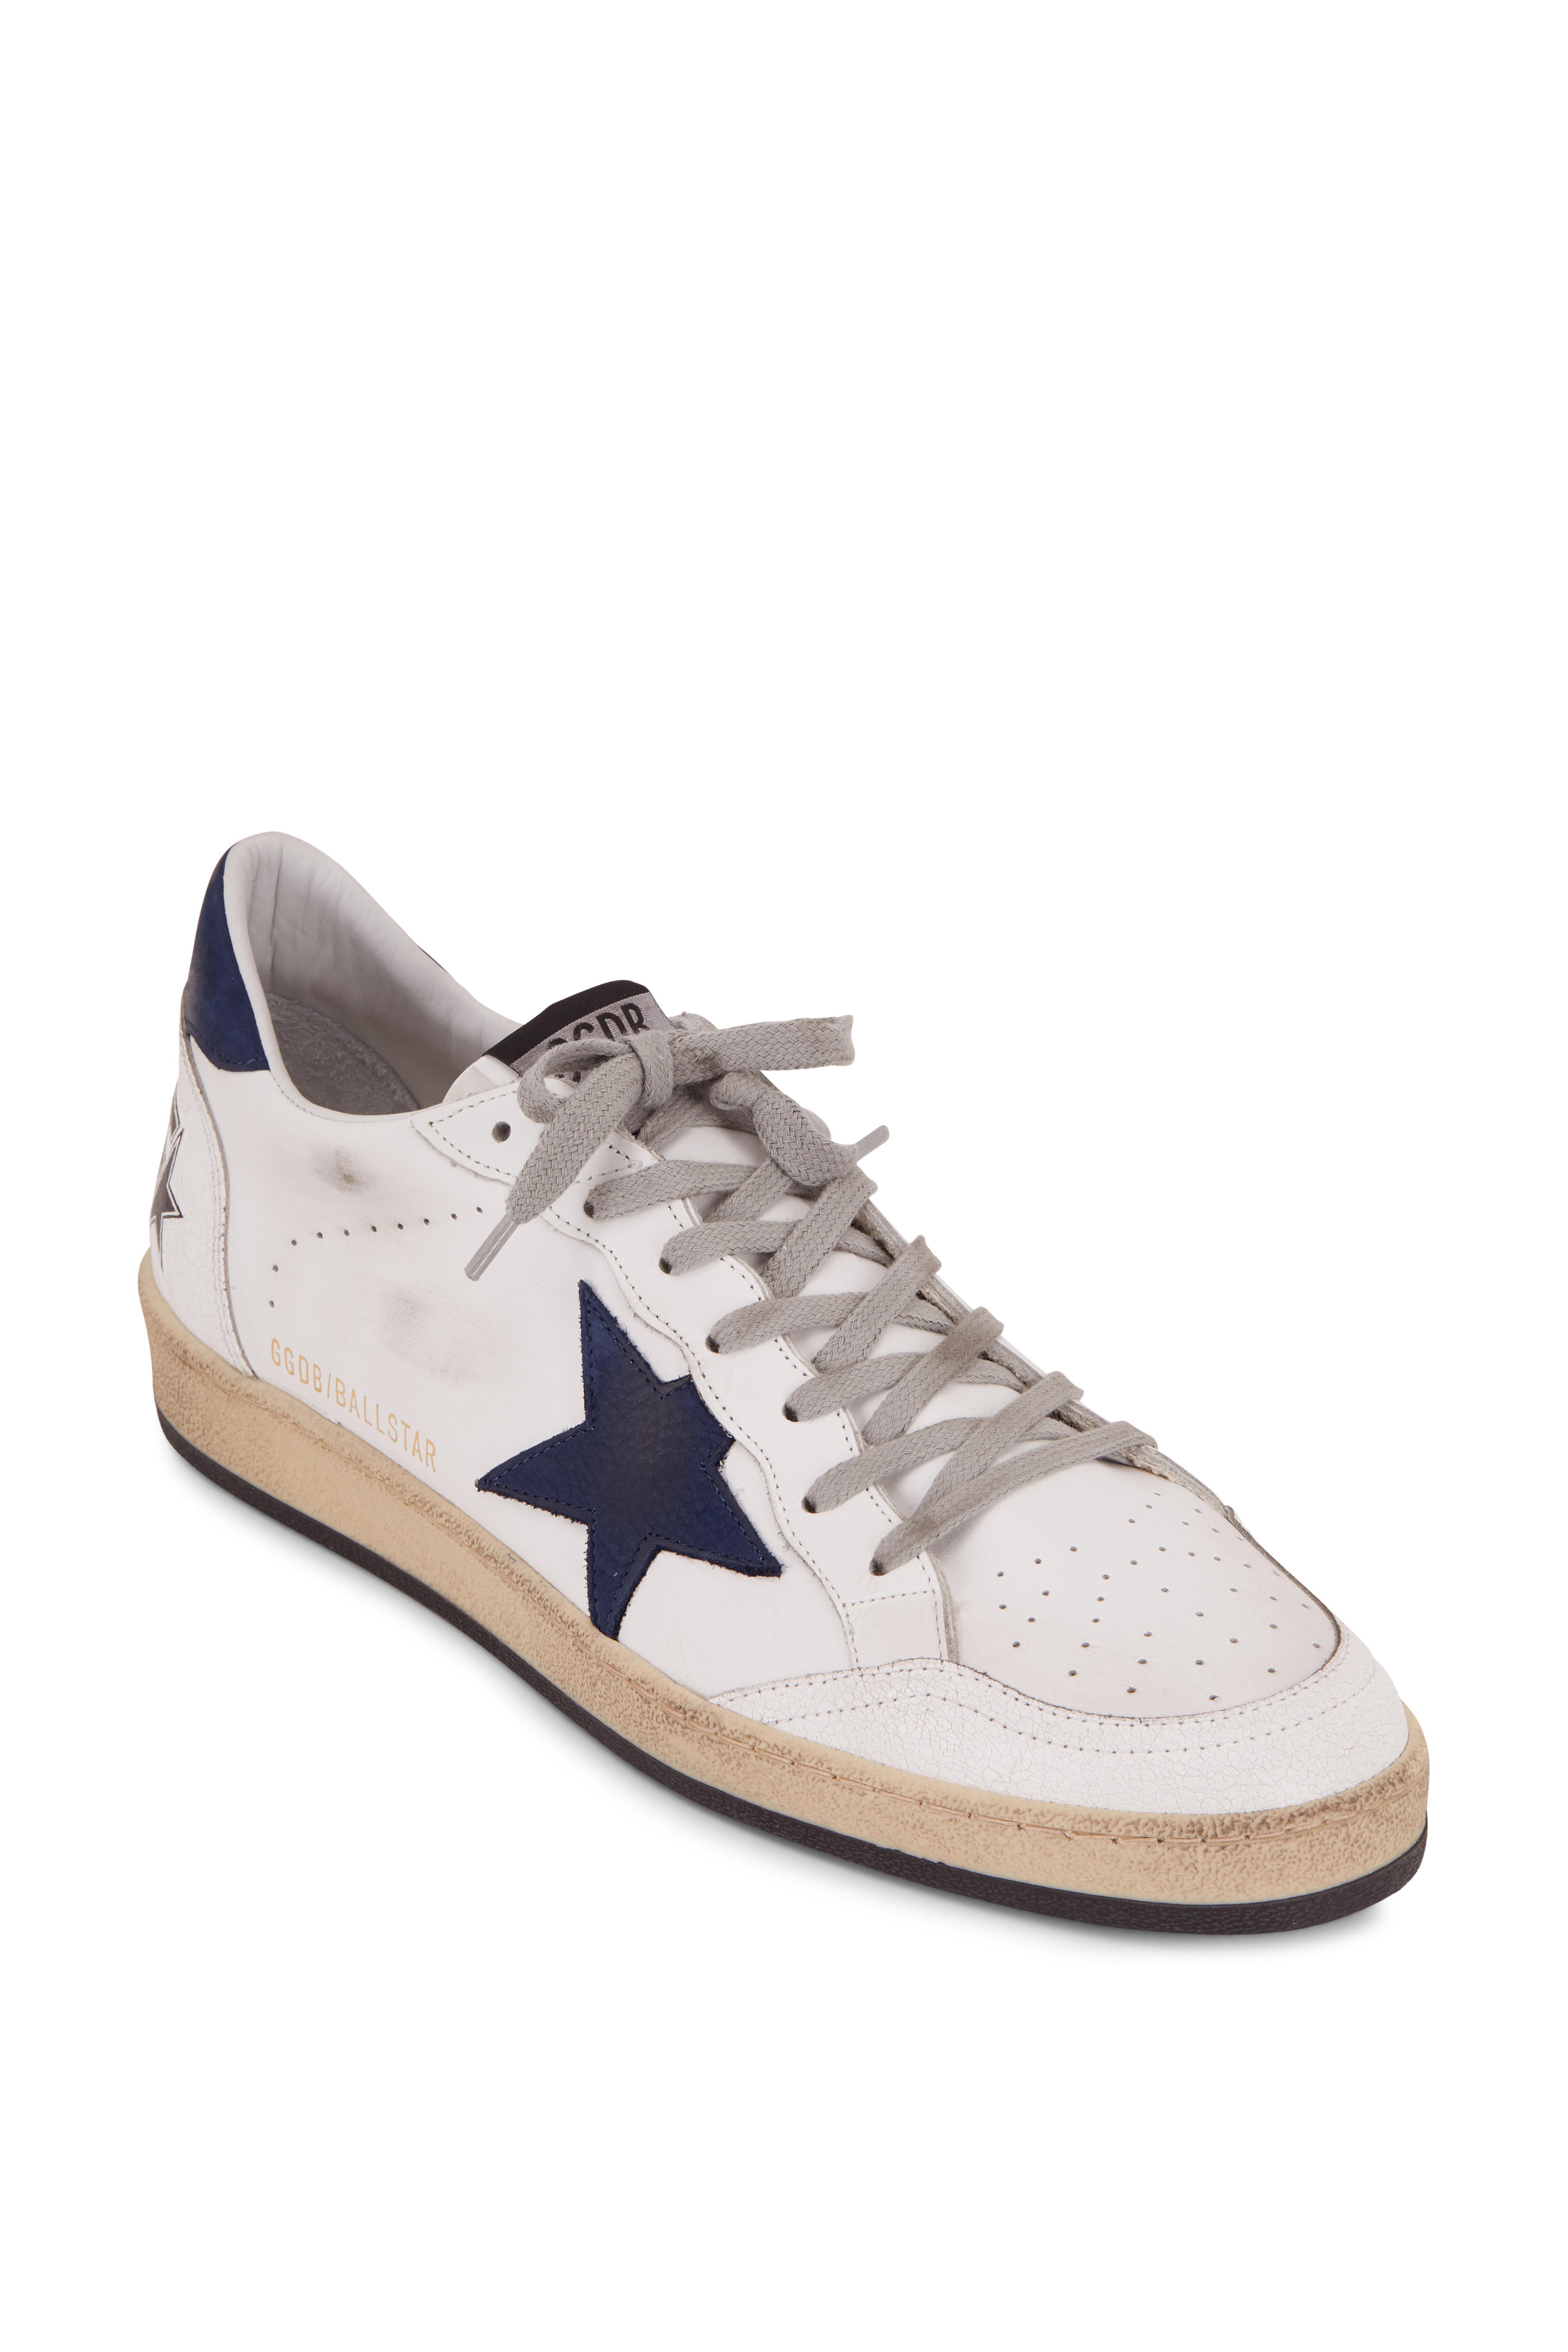 Ball Star White Leather Blue Suede Star 